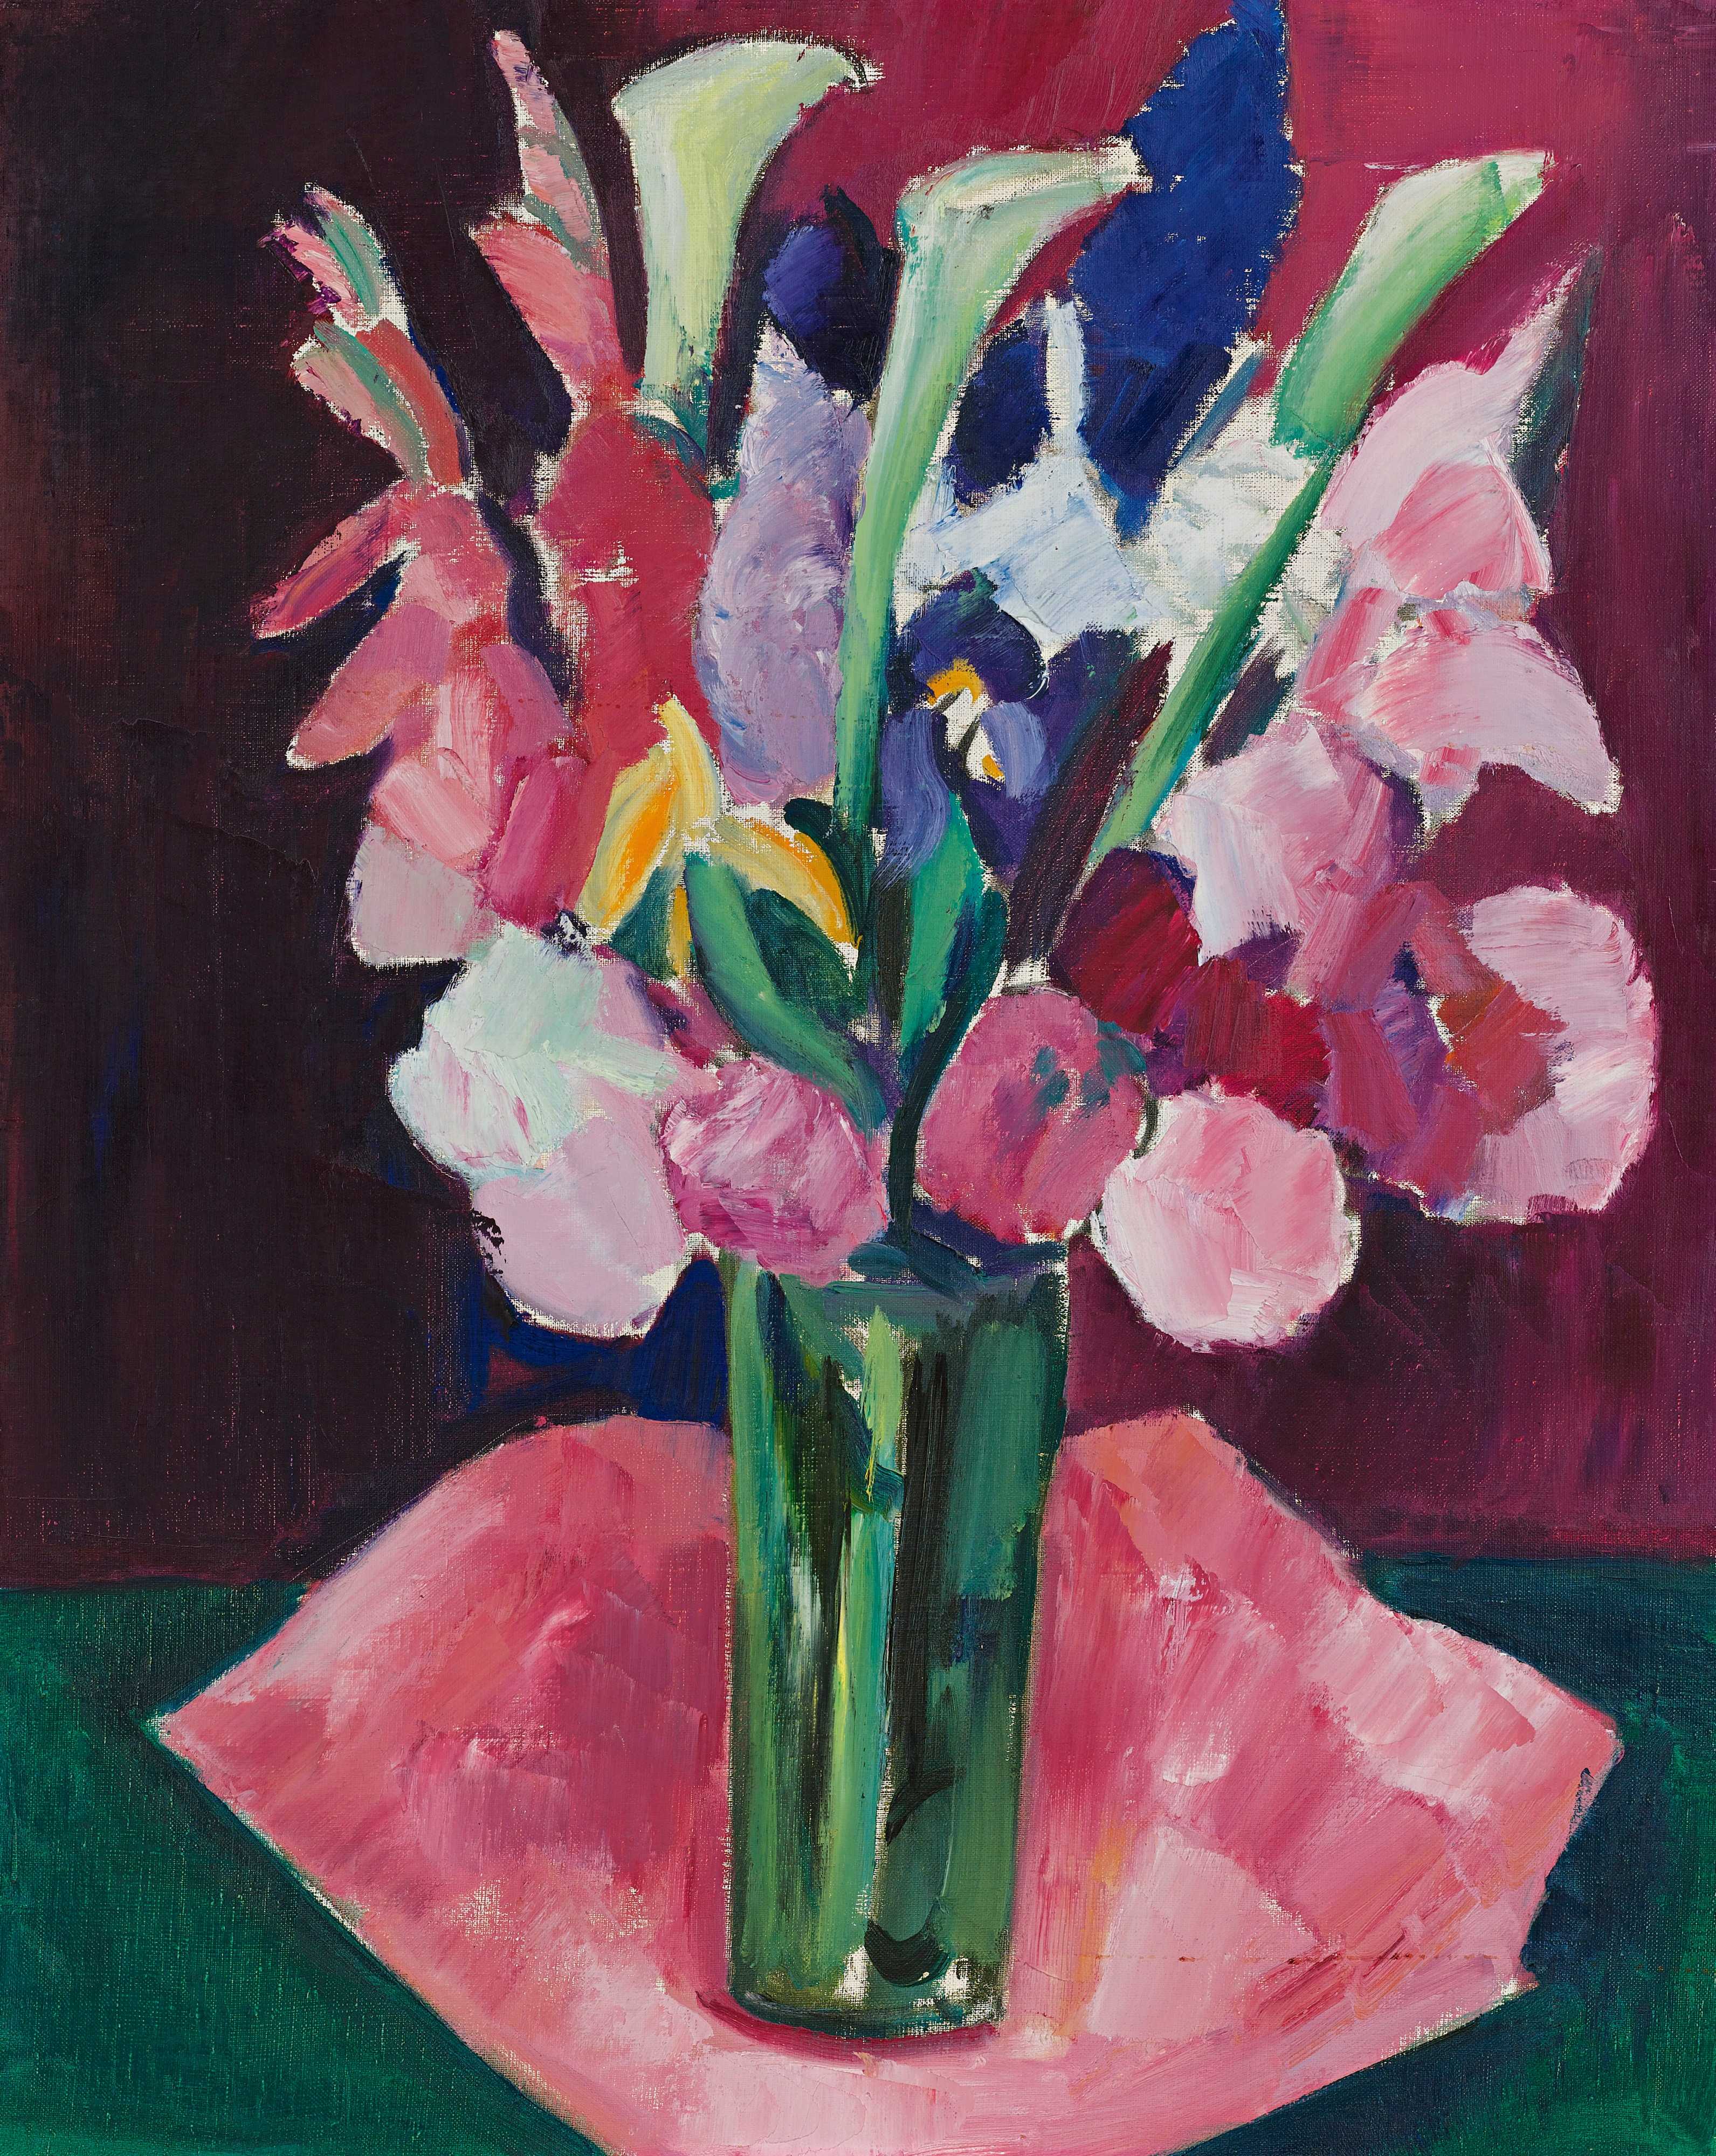 Find out more about Marsden Hartley - Flowers in a Vase